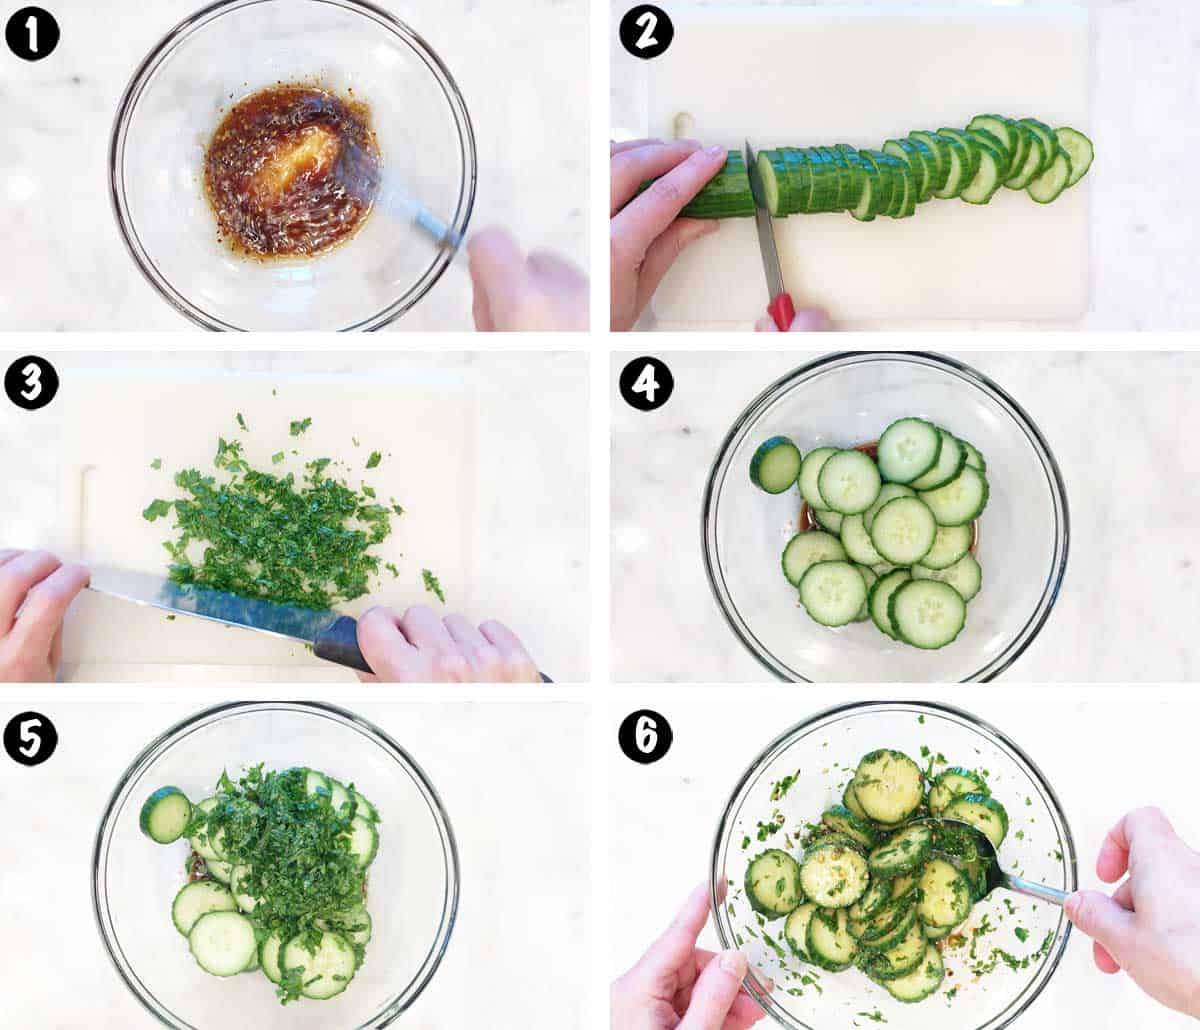 A six-photo collage showing the steps for making an Asian-style cucumber salad. 